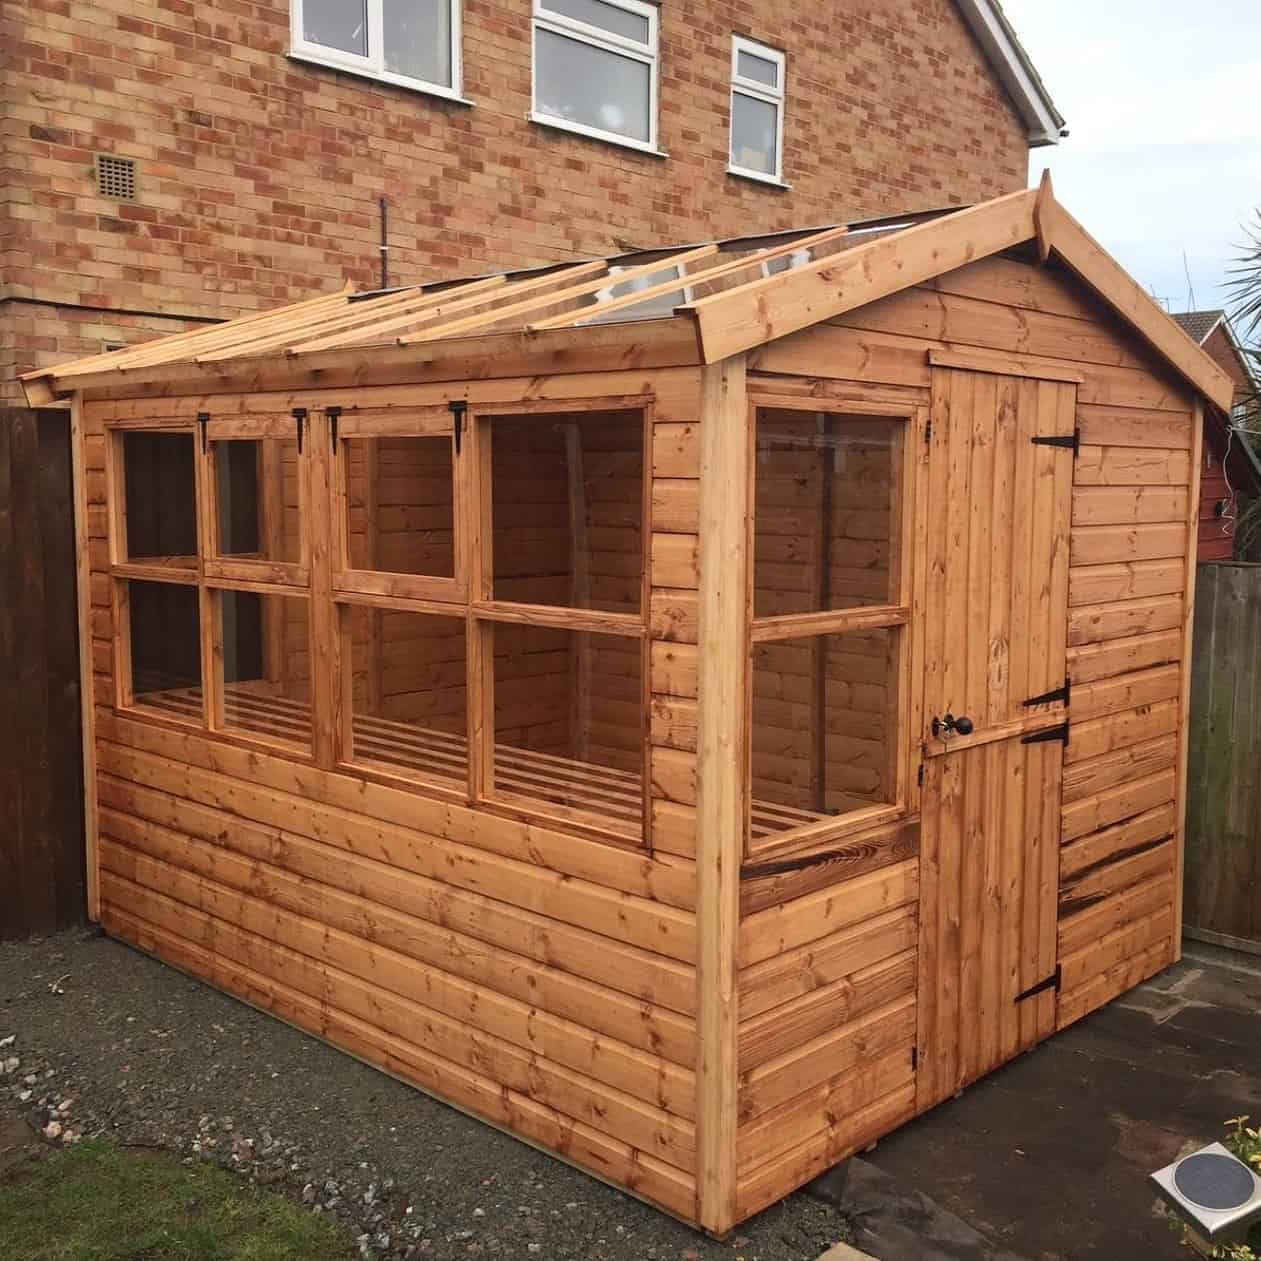 Apex Half Glass Roof Potting Shed by A&amp;J - Berkshire 